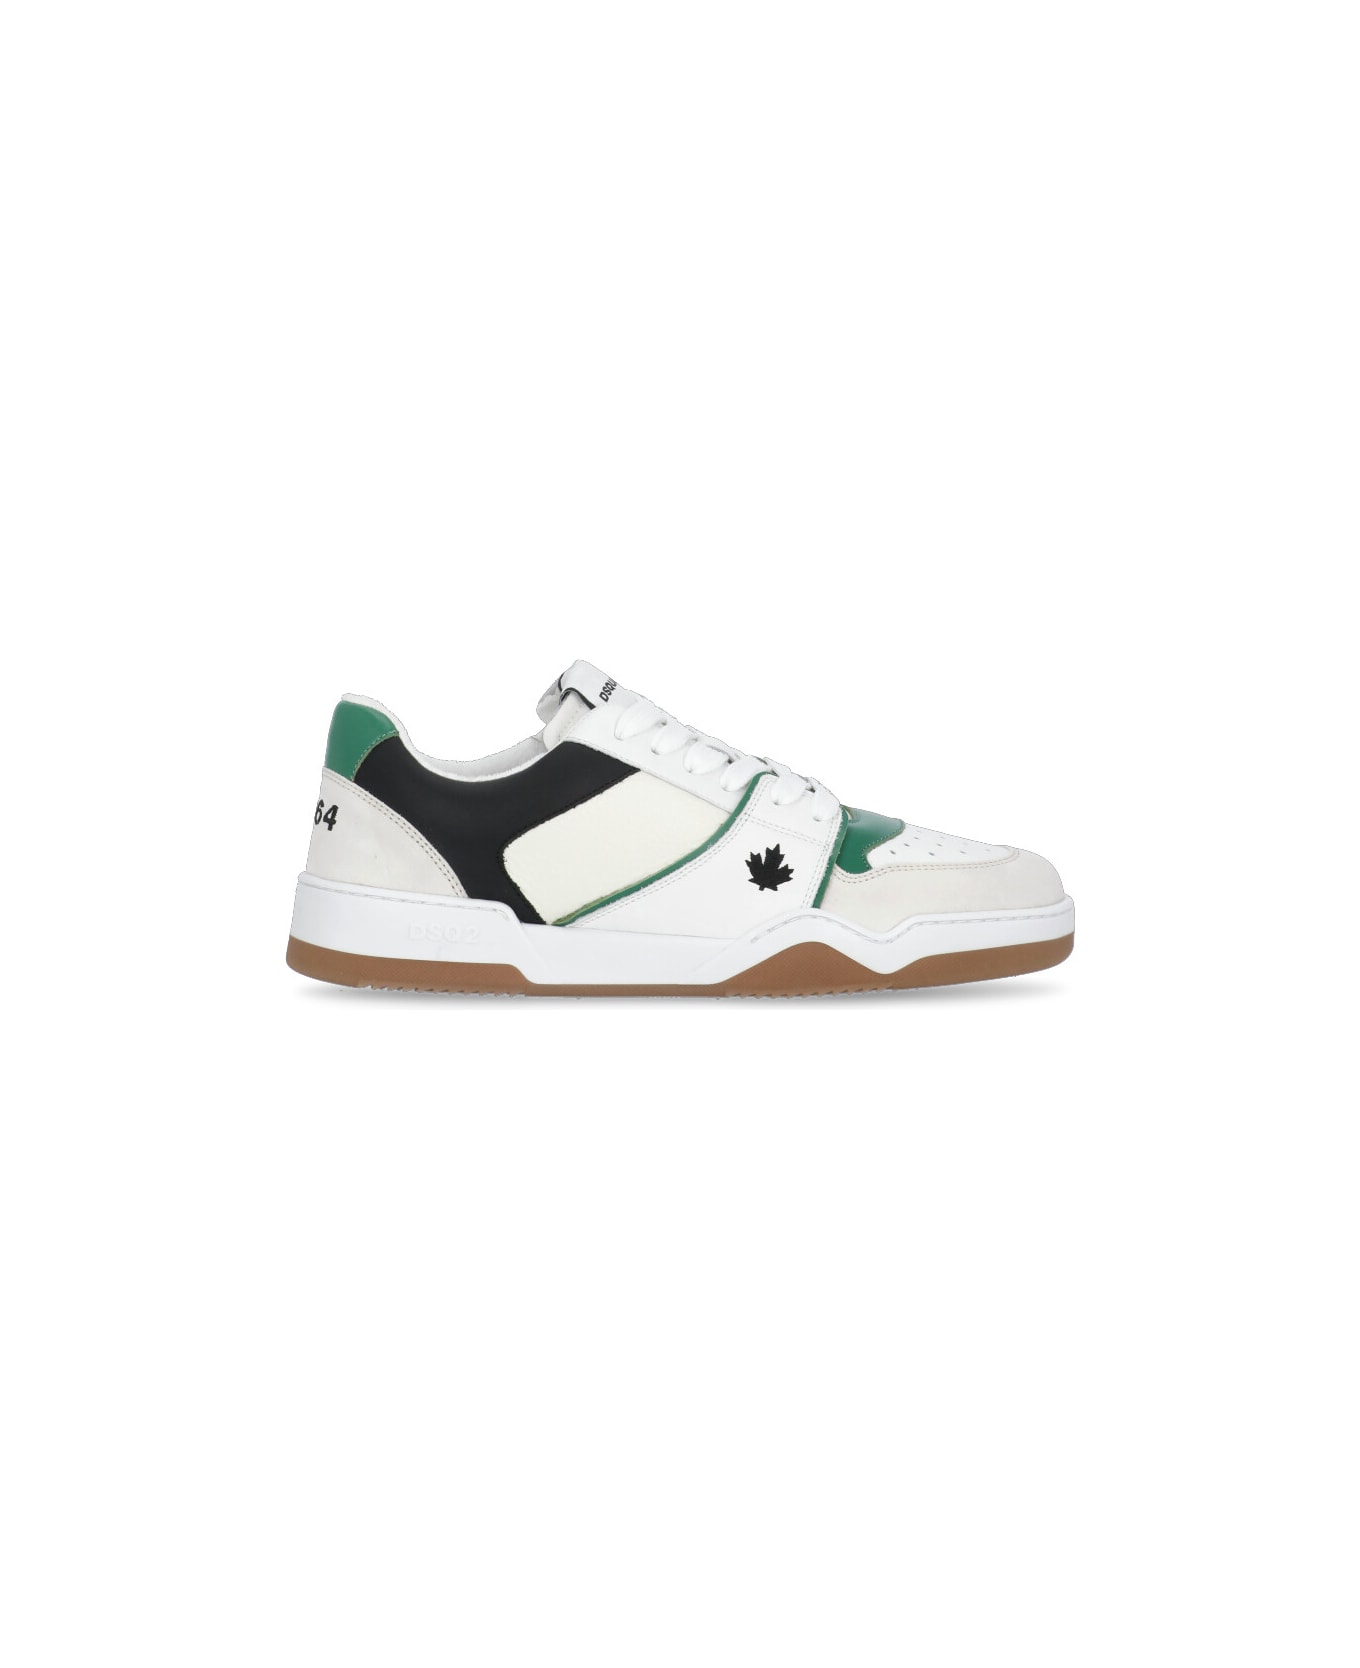 Dsquared2 Spiker Sneakers - M2724 スニーカー